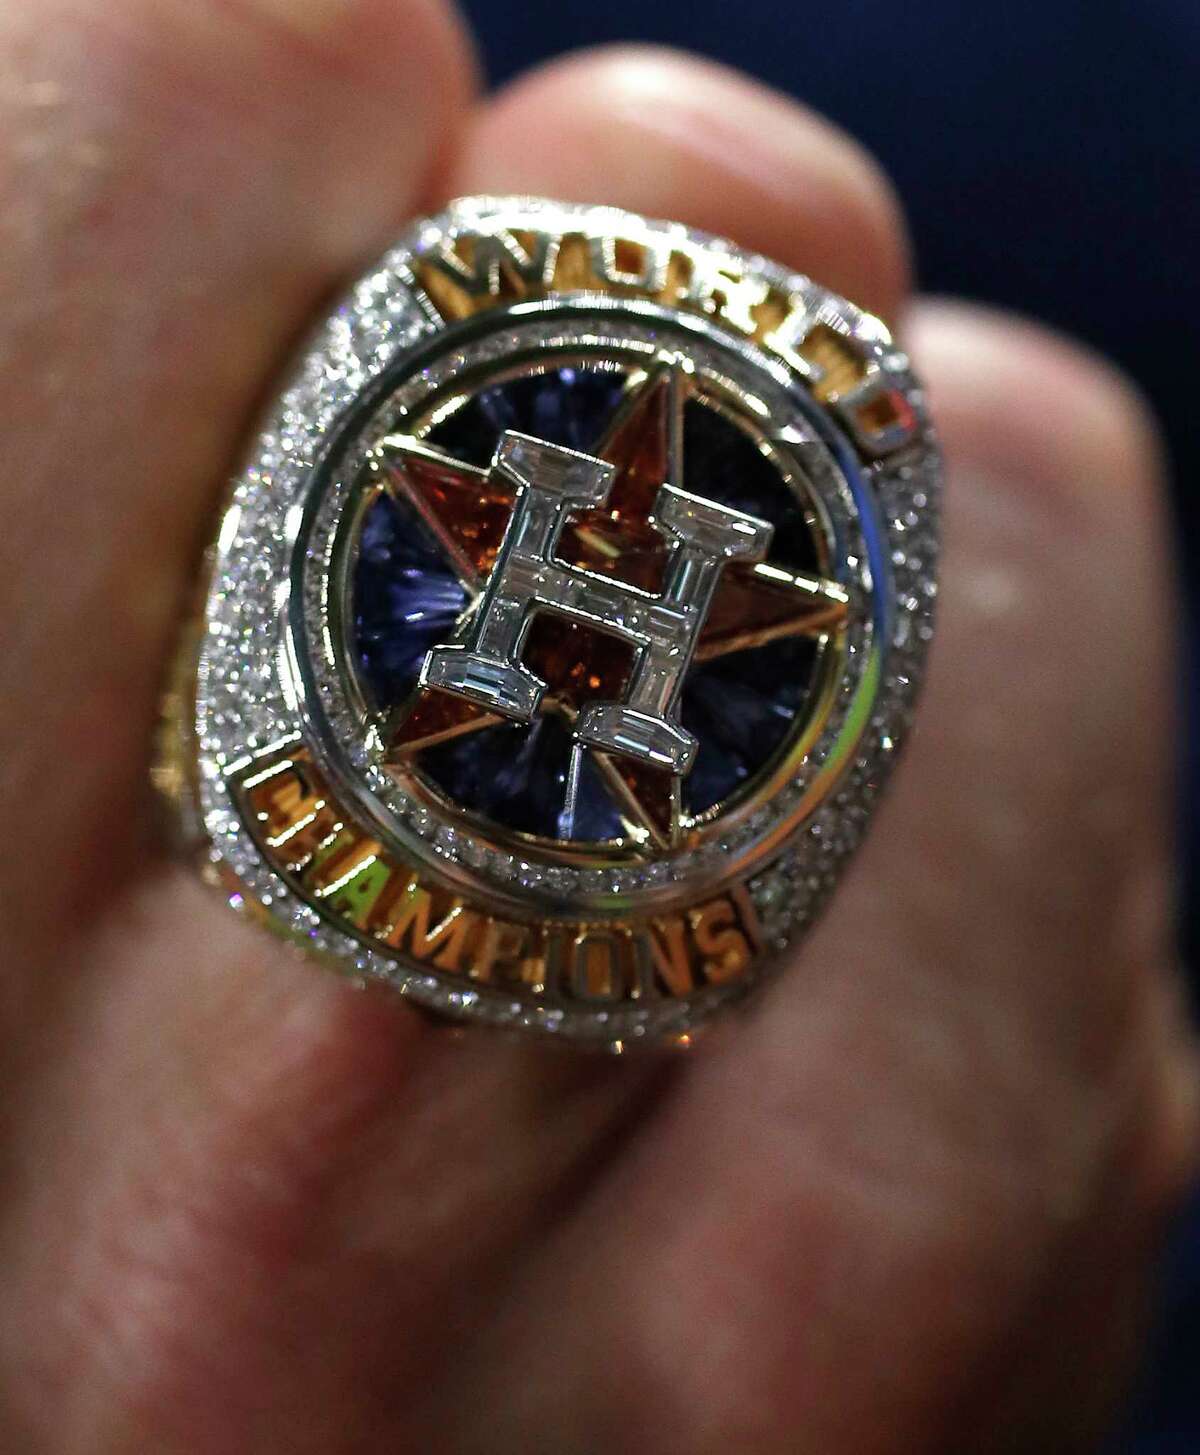 Astros Pull World Series Ring from Being Auctioned, Despite COVID